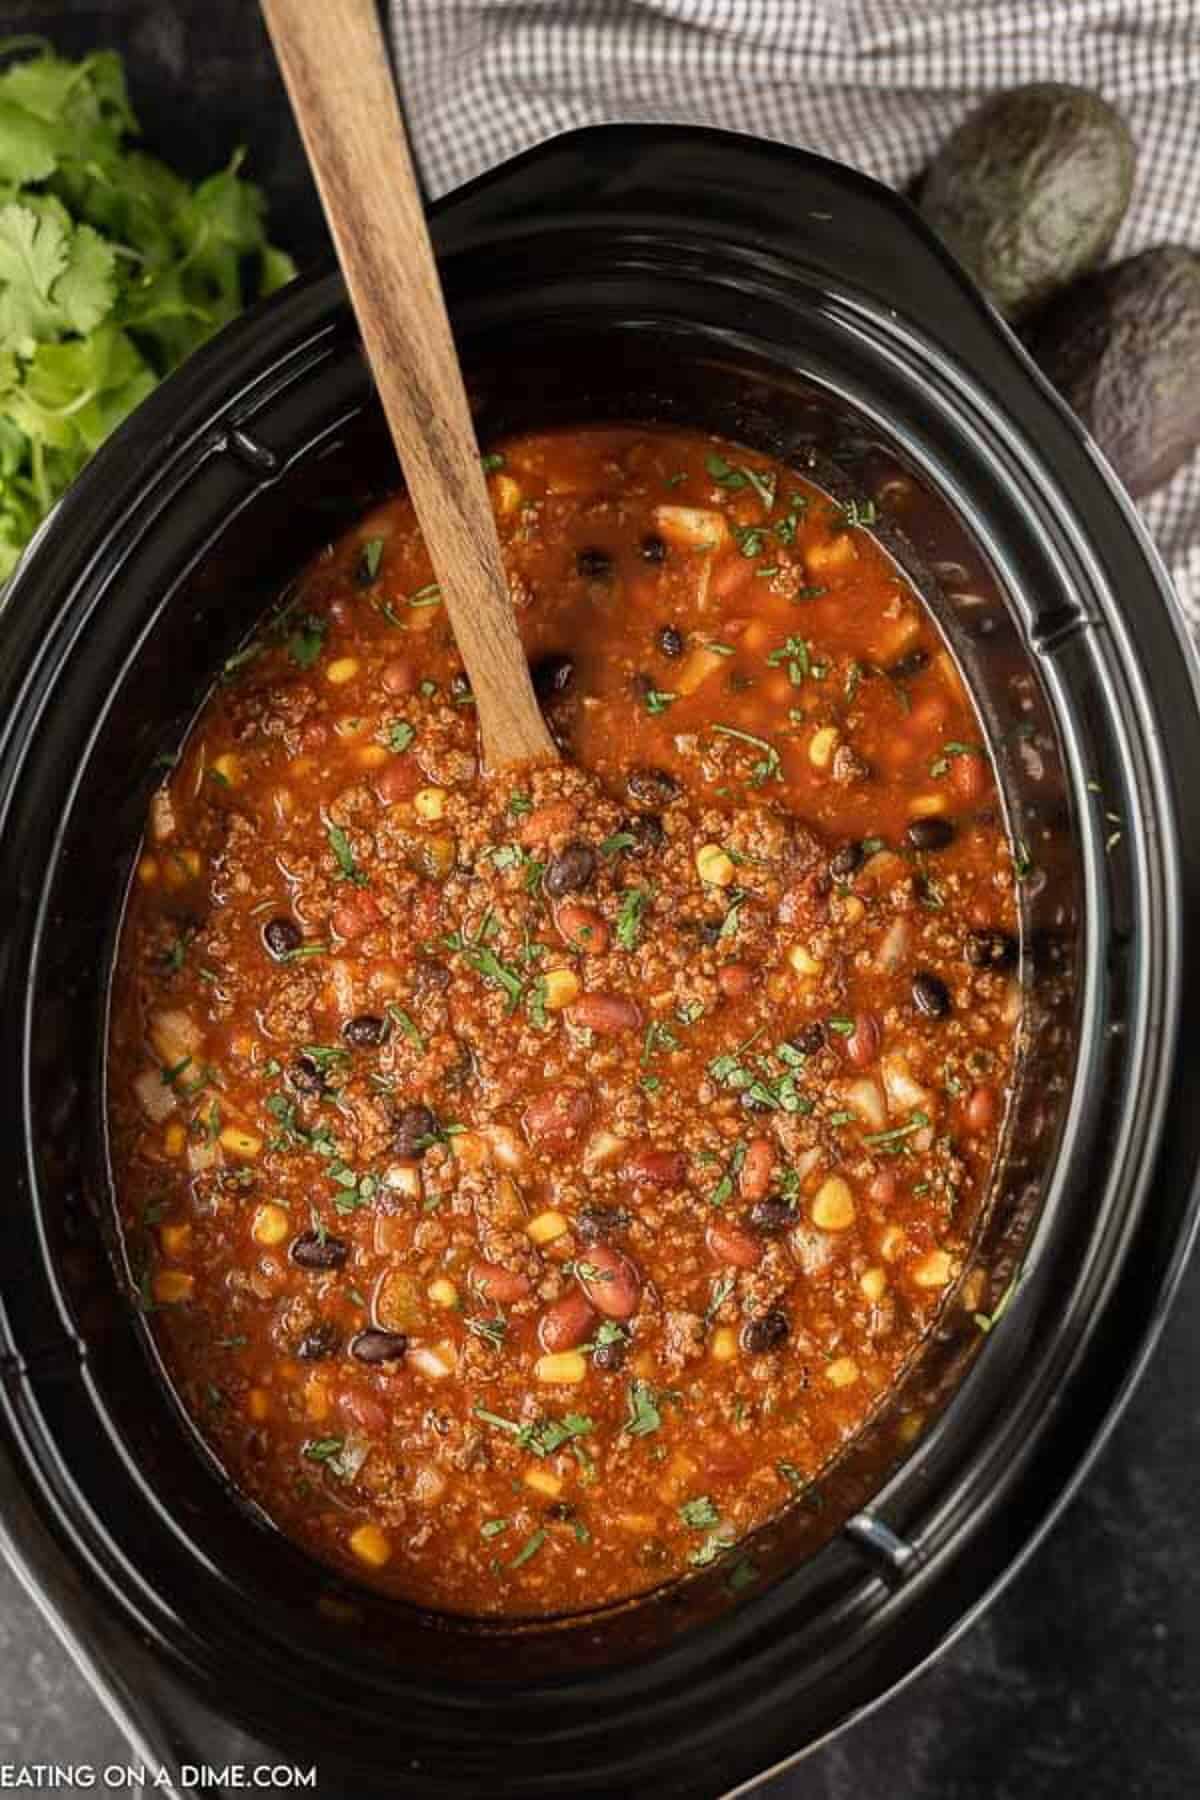 Taco chili cooked in a crock pot topped with fresh diced cilantro with a serving spoon in the taco chili.  